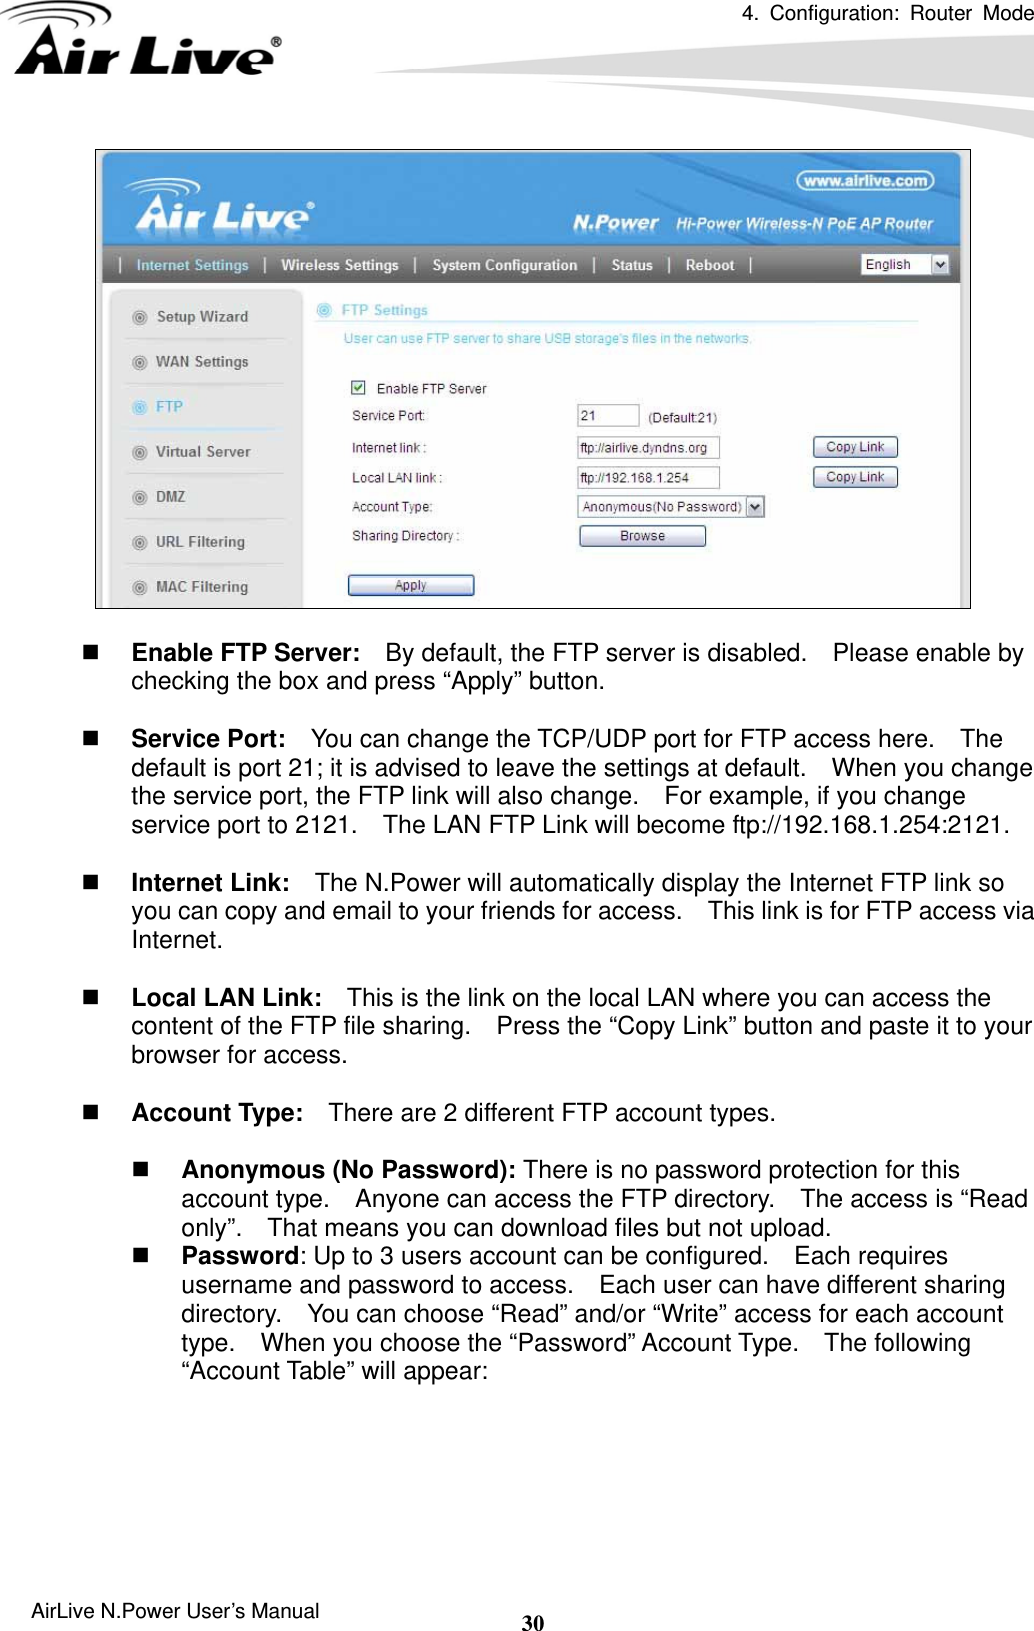 4. Configuration: Router Mode  AirLive N.Power User’s Manual  30   Enable FTP Server:    By default, the FTP server is disabled.    Please enable by checking the box and press “Apply” button.   Service Port:    You can change the TCP/UDP port for FTP access here.    The default is port 21; it is advised to leave the settings at default.    When you change the service port, the FTP link will also change.    For example, if you change service port to 2121.    The LAN FTP Link will become ftp://192.168.1.254:2121.   Internet Link:    The N.Power will automatically display the Internet FTP link so you can copy and email to your friends for access.    This link is for FTP access via Internet.   Local LAN Link:    This is the link on the local LAN where you can access the content of the FTP file sharing.    Press the “Copy Link” button and paste it to your browser for access.   Account Type:    There are 2 different FTP account types.     Anonymous (No Password): There is no password protection for this account type.    Anyone can access the FTP directory.    The access is “Read only”.    That means you can download files but not upload.  Password: Up to 3 users account can be configured.    Each requires username and password to access.    Each user can have different sharing directory.    You can choose “Read” and/or “Write” access for each account type.    When you choose the “Password” Account Type.  The following “Account Table” will appear:  